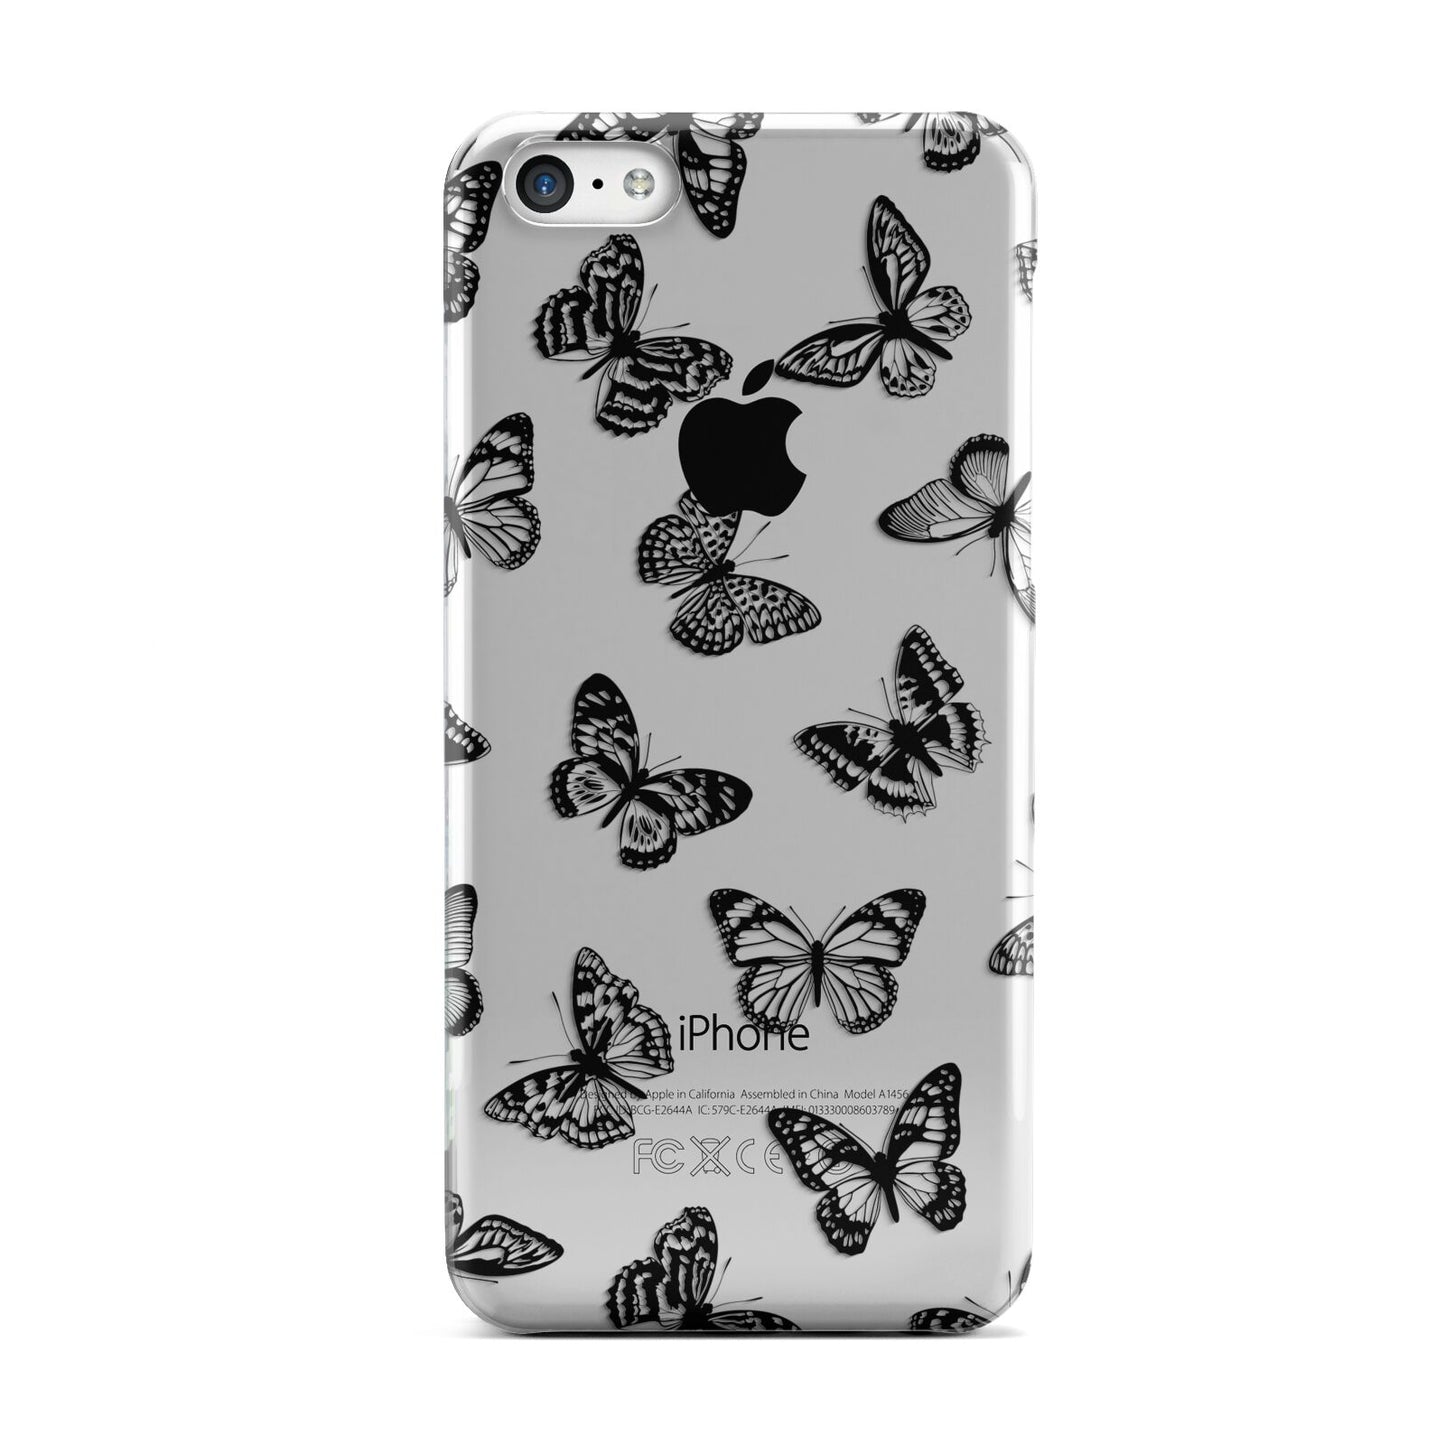 Butterfly Apple iPhone 5c Case